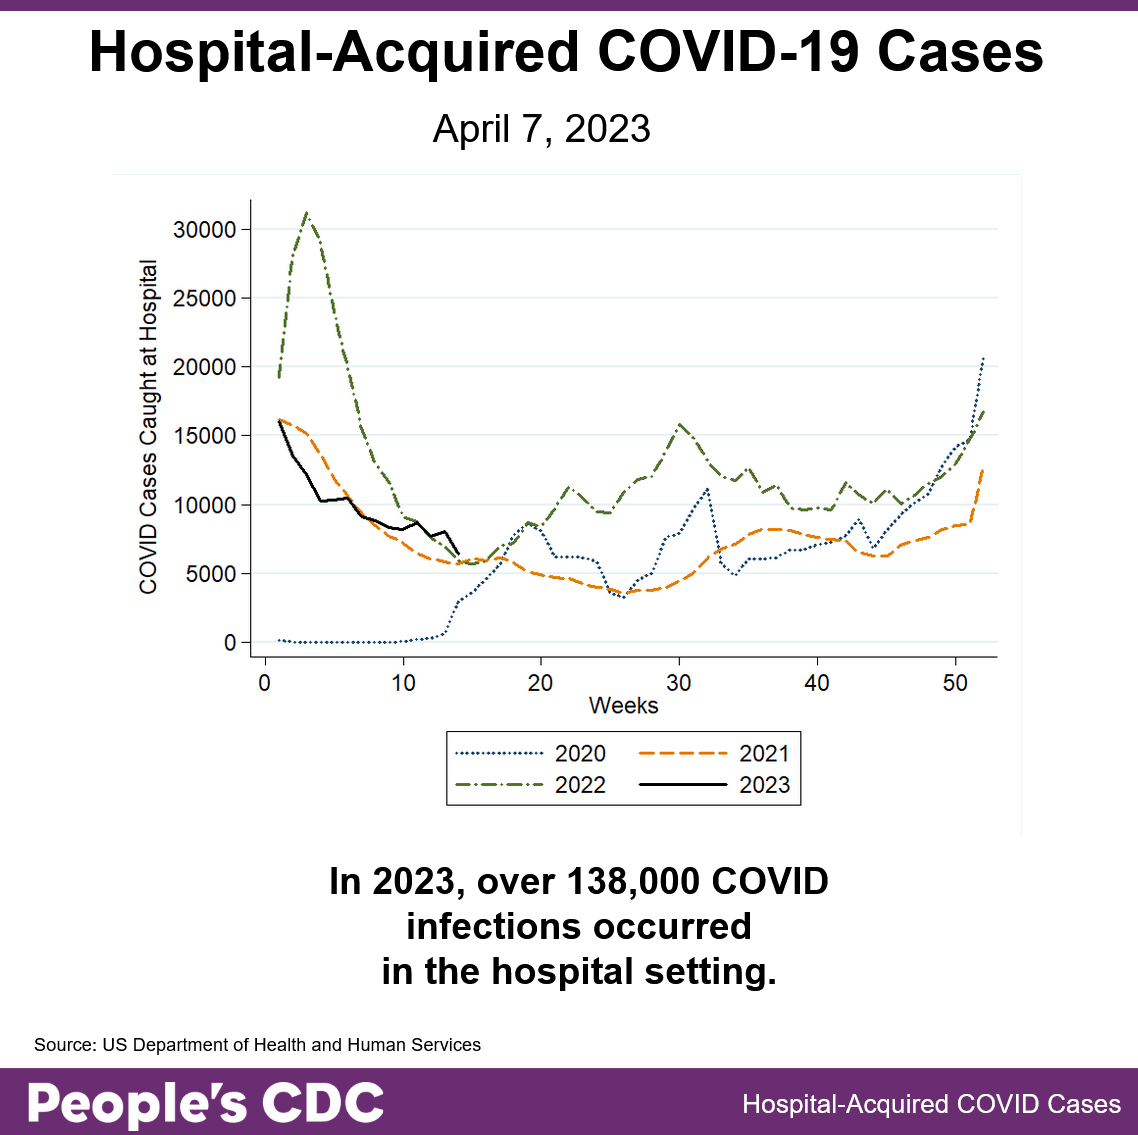 Image of line graphs titled “Hospital-Acquired COVID-19 Cases” from years 2020 to 2023. The X axis shows weeks labeled from 0 to 50, and the Y axis is COVID Cases Caught at Hospital labeled from 0 to 30,000. Each year is represented by a different line style. 2020 is a navy dotted line, 2021 orange dashed, 2022 green dot and dash, 2023 black solid line. The lines are all overlapping, with a slight dip around weeks 20 through 35 and higher values around 0 and 50. The highest peak is in 2022 within the first 10 weeks, when cases rose above 30,000. The 2020 line starts at 0 and begins to increase around week 10. The line for 2023 closely overlaps with 2021, beginning above 15,000 at week 0, and ending above 5,000 cases around week 14.